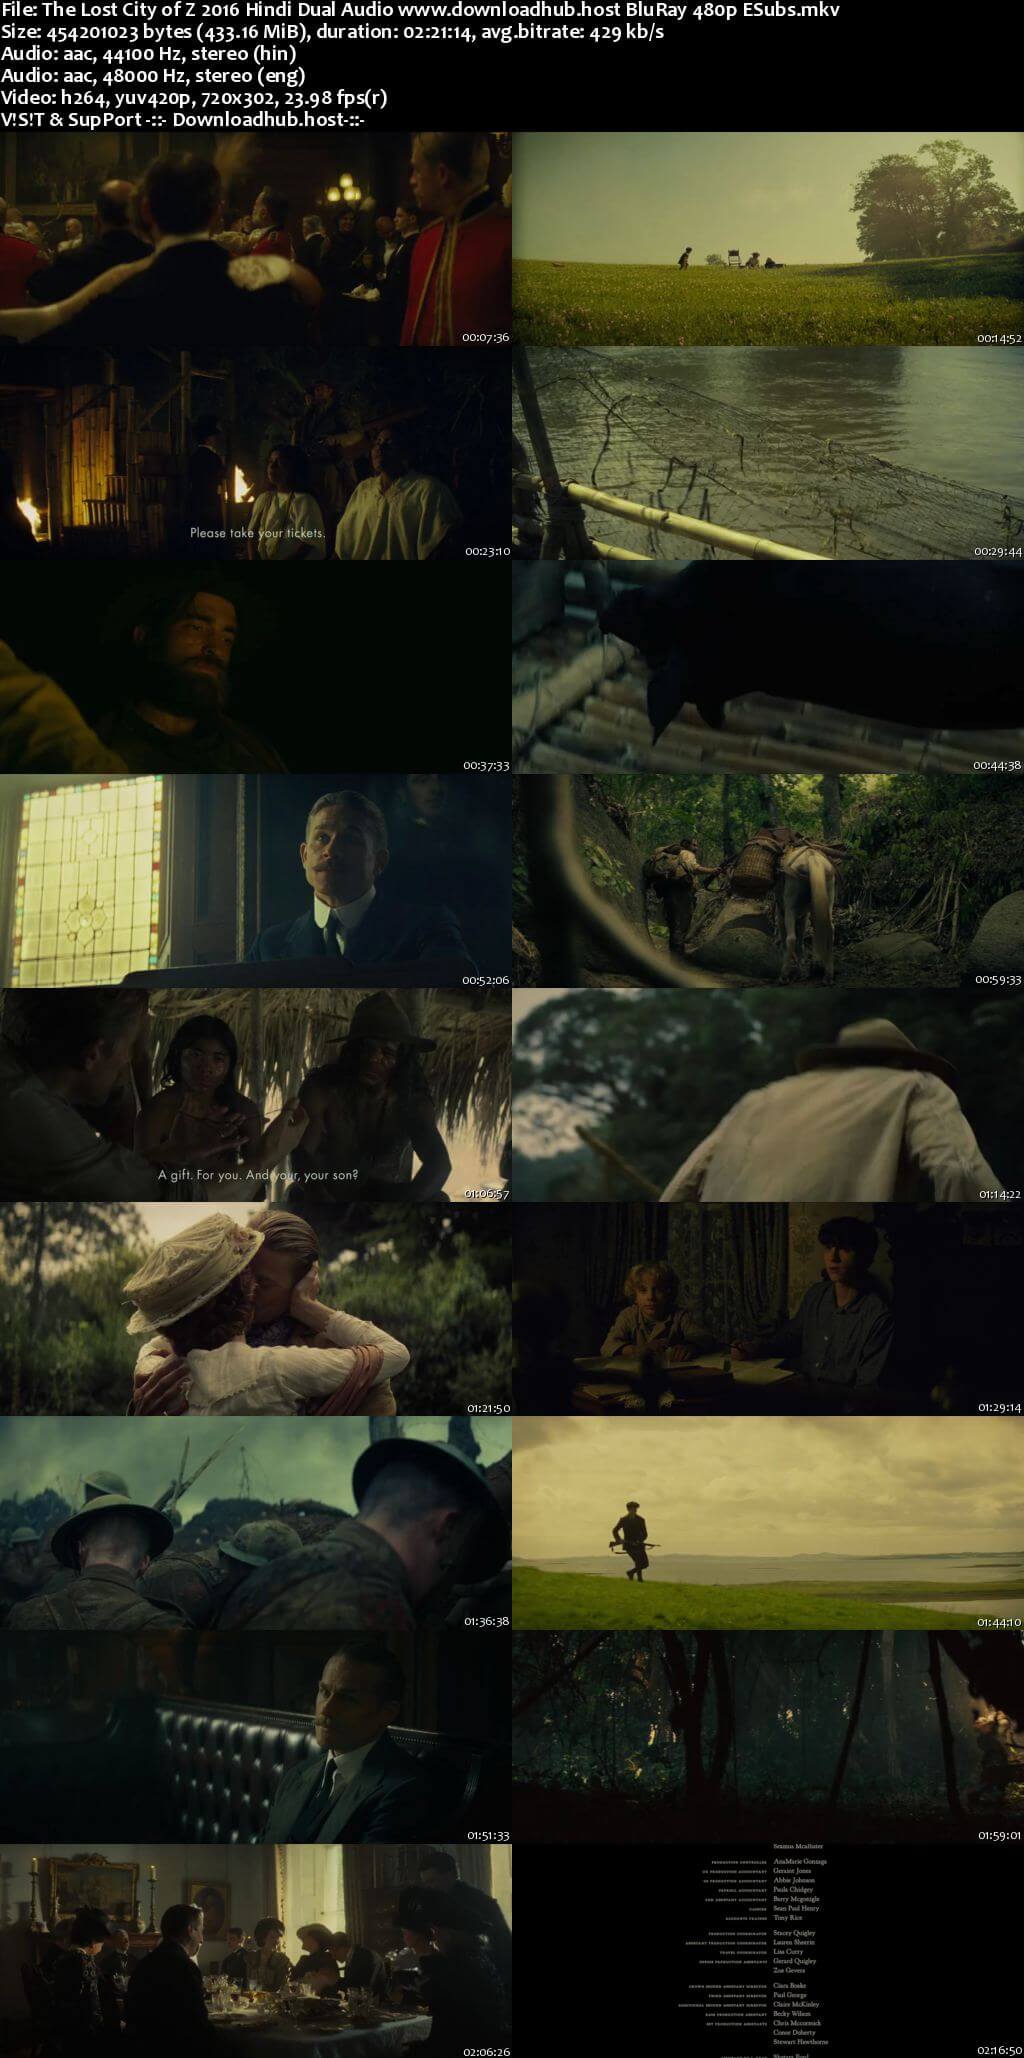 The Lost City of Z 2016 Hindi Dual Audio 400MB BluRay 480p ESubs